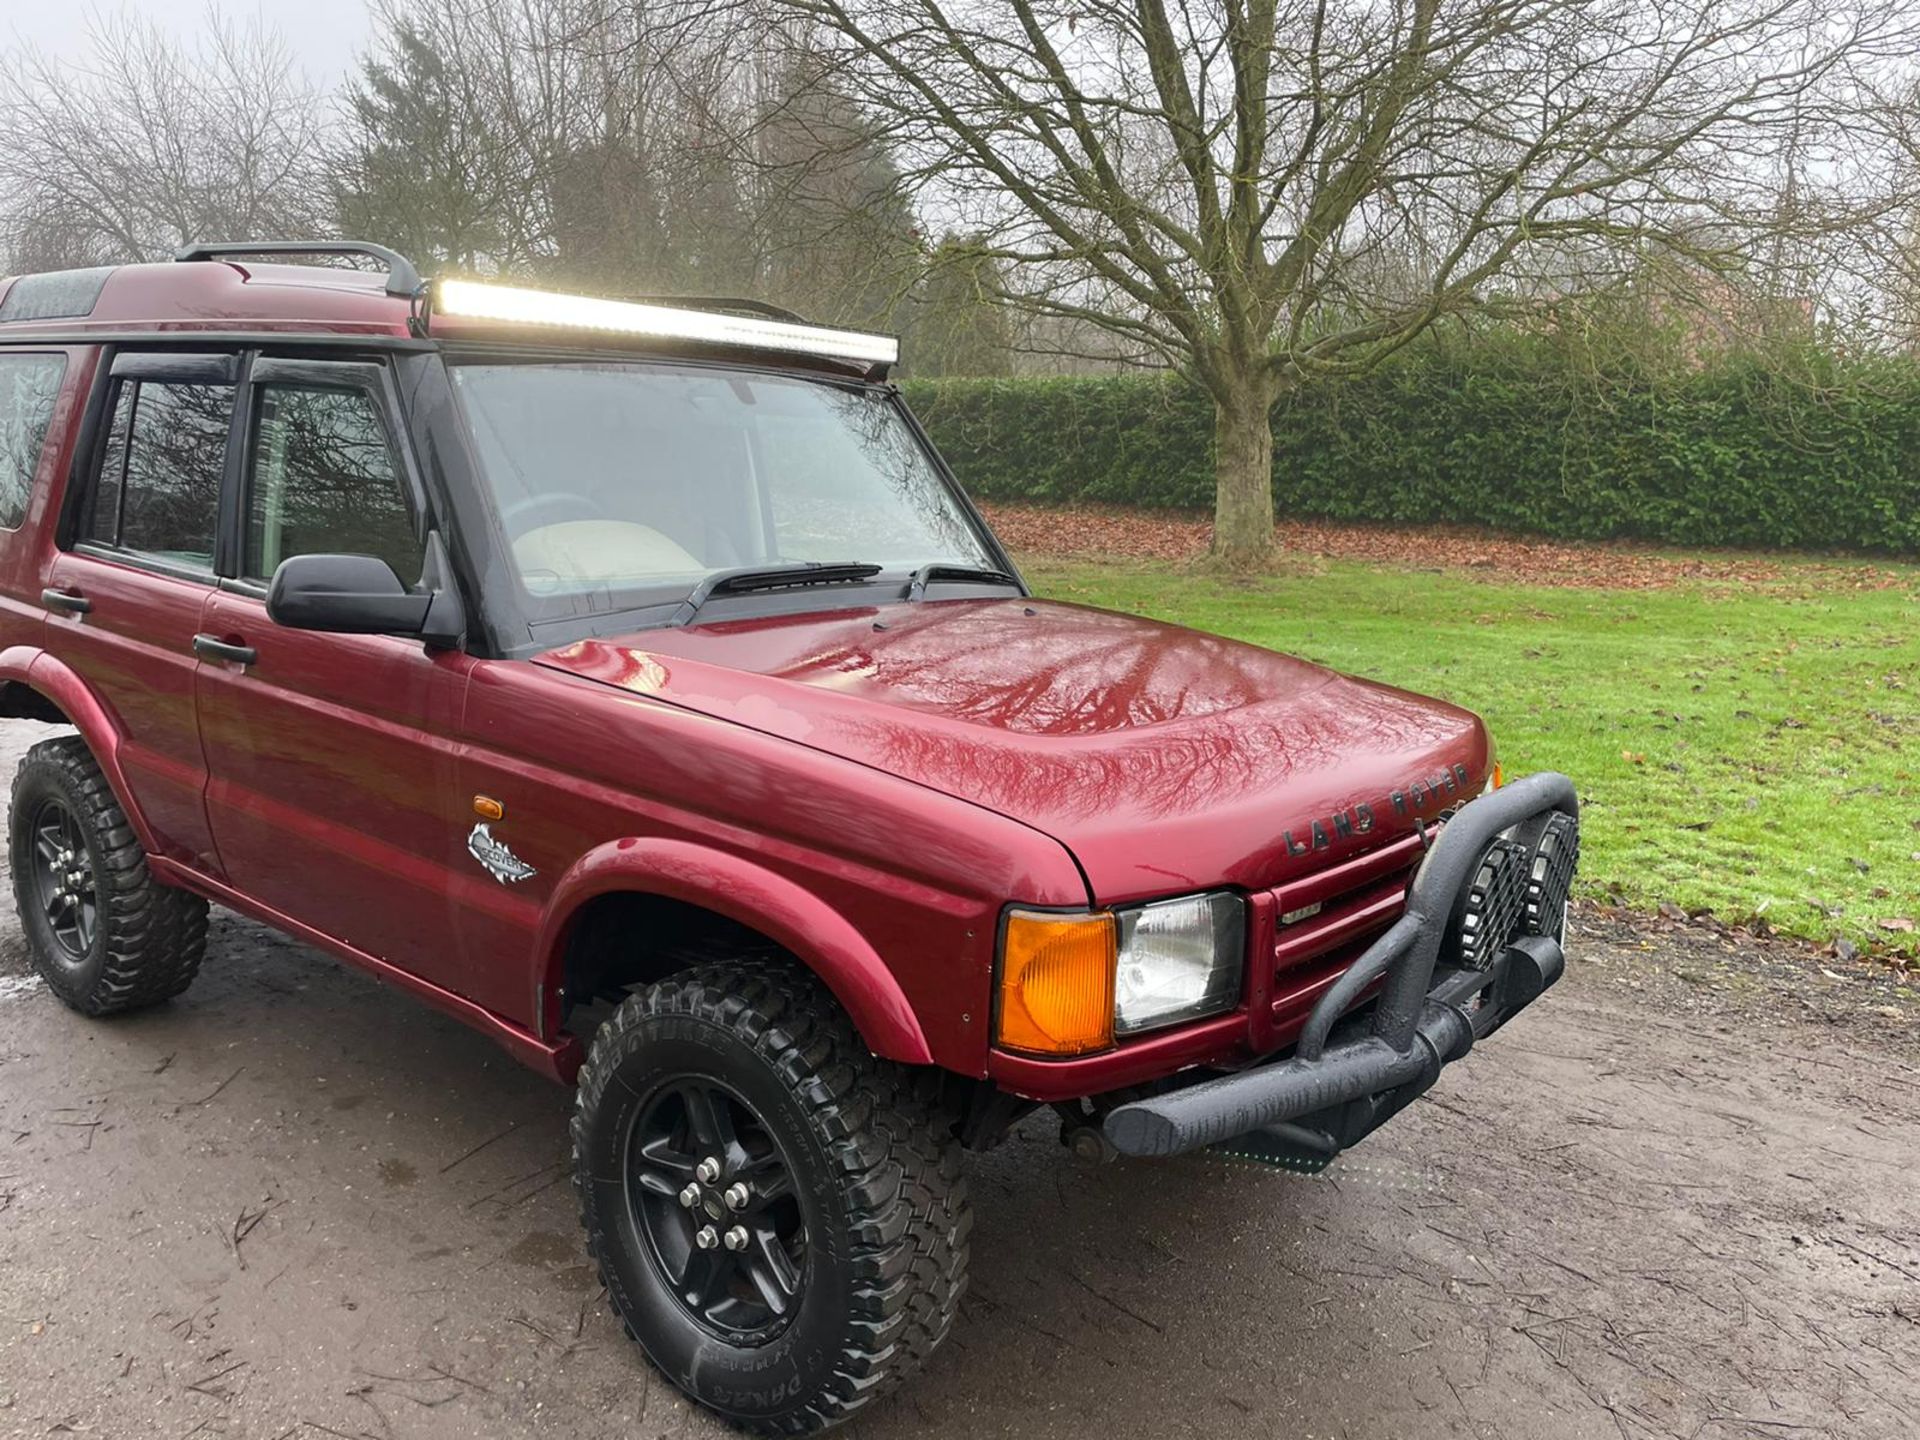 2001 LAND ROVER DISCOVERY TD5 RED ESTATE, 157,895 MILES, 2.5 DIESEL * NO VAT* - Image 2 of 16